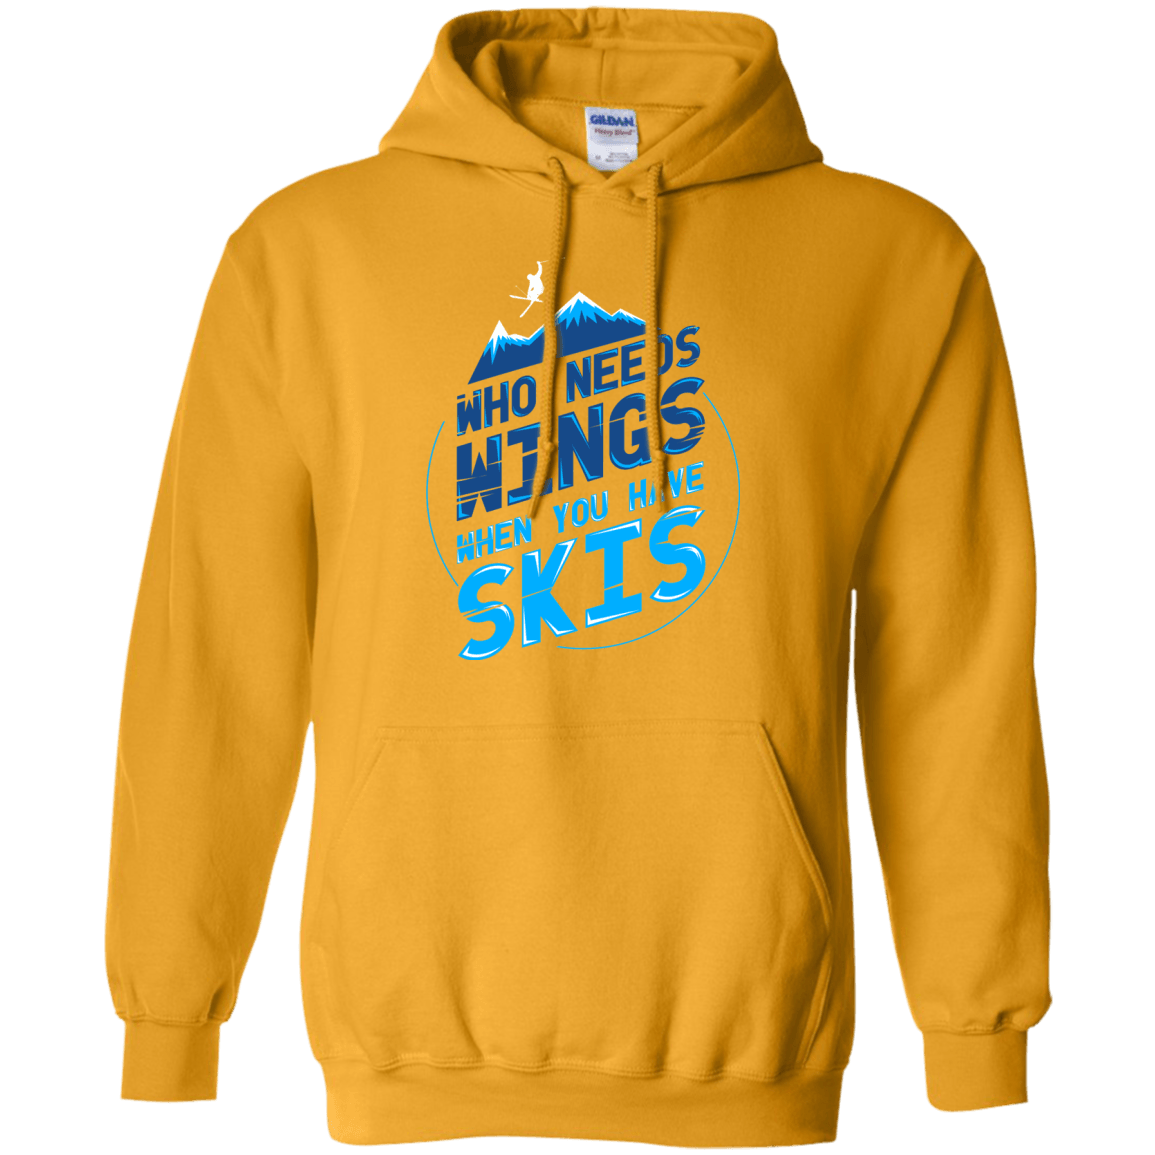 Who Needs Wings When You Have Skis Hoodies - Powderaddicts